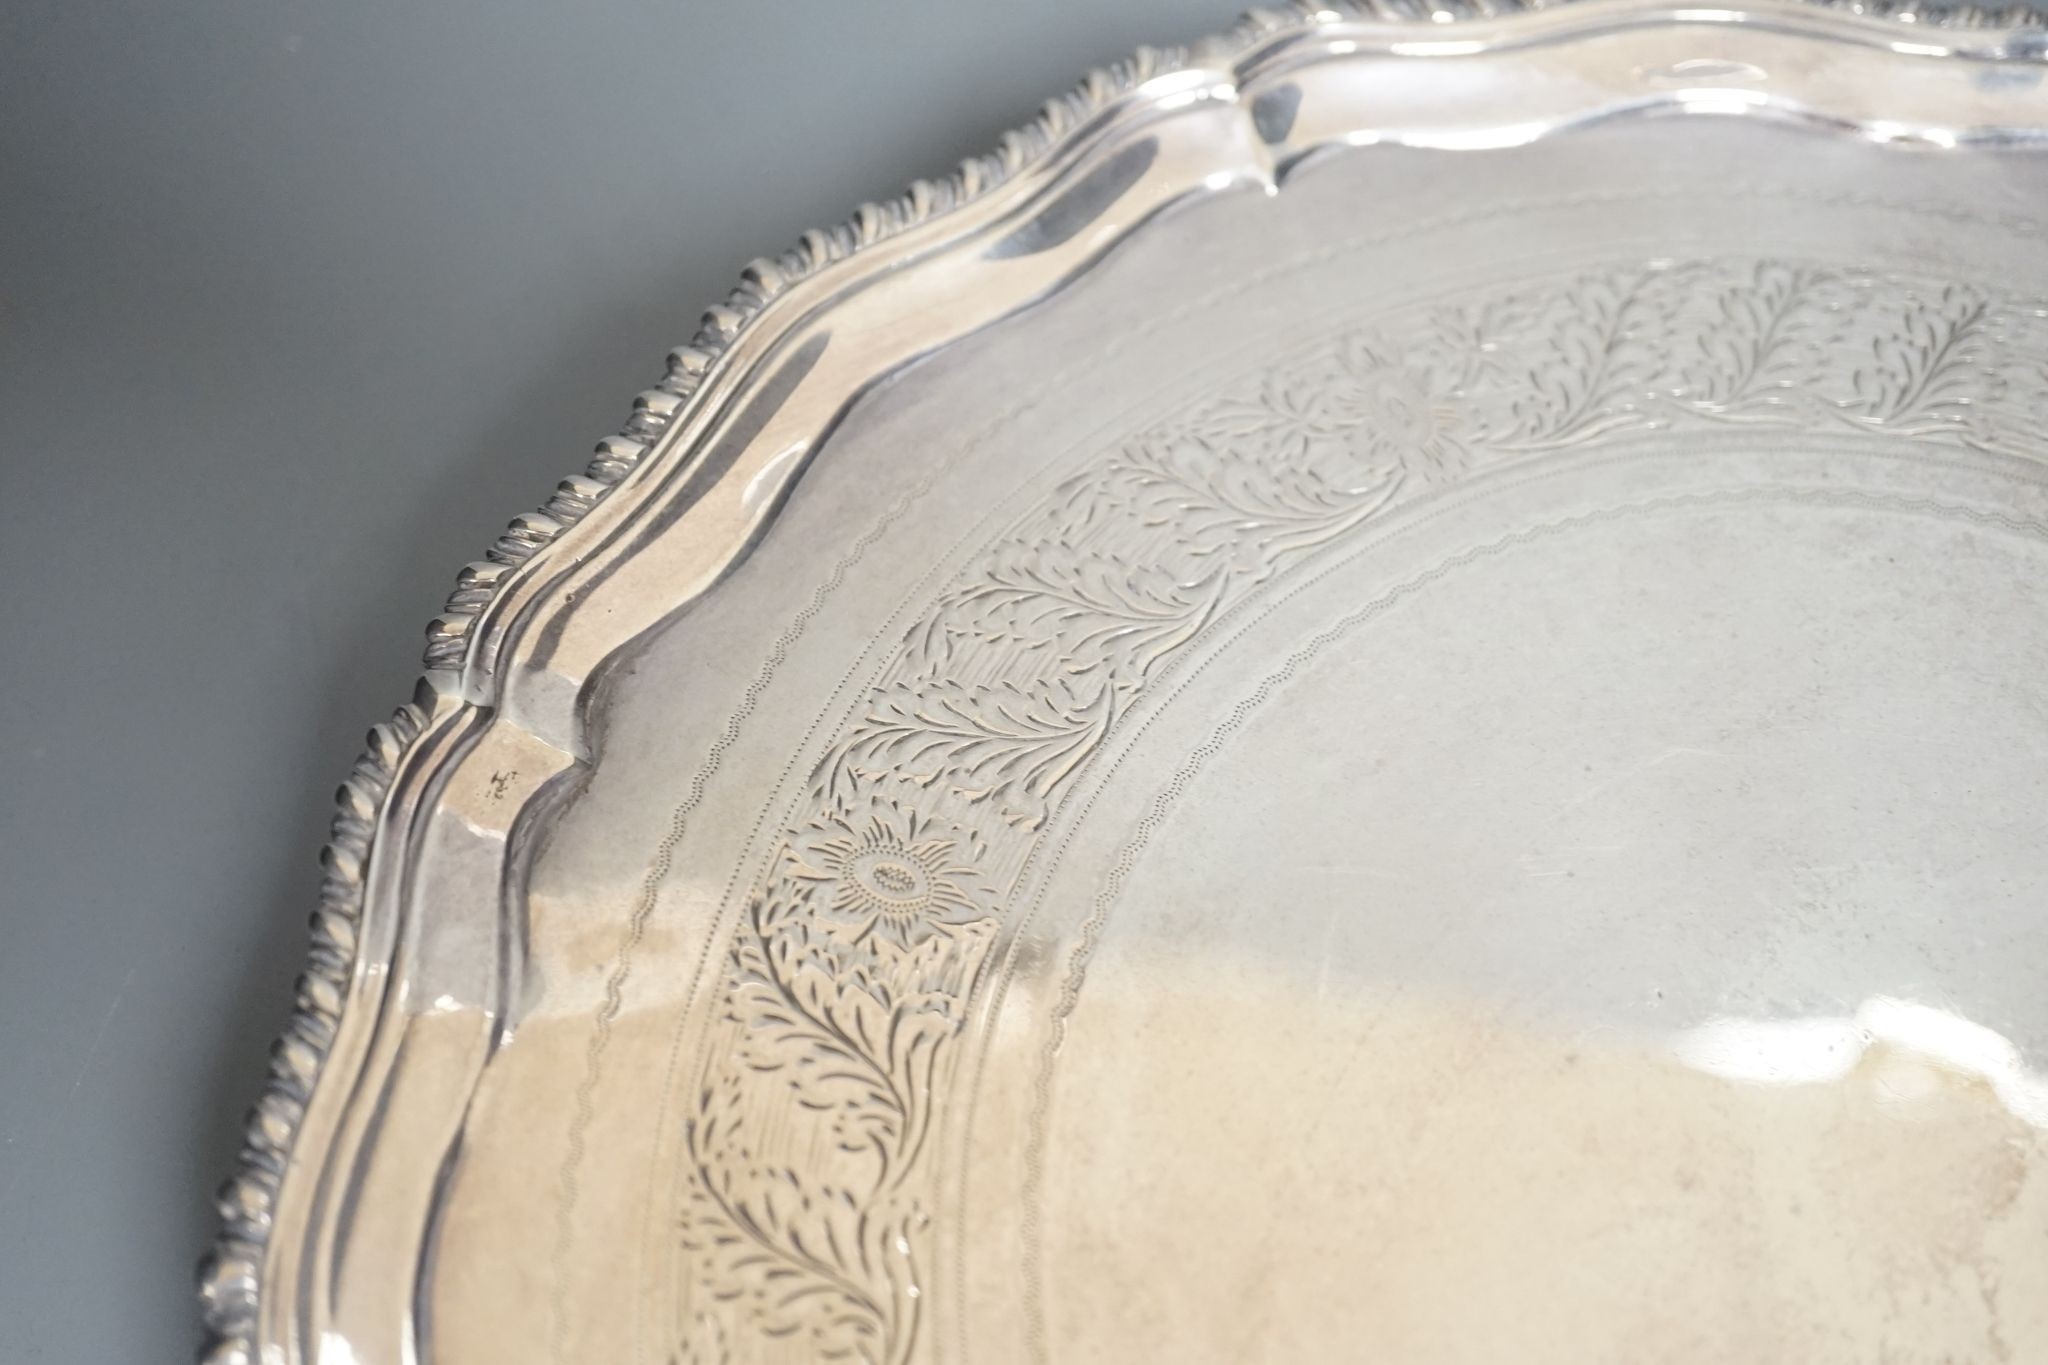 A George III silver salver, with gadrooned border, on three shell feet, Ebenezer Coker, London, 1773, 28.1cm, (repairs), 20.5oz.